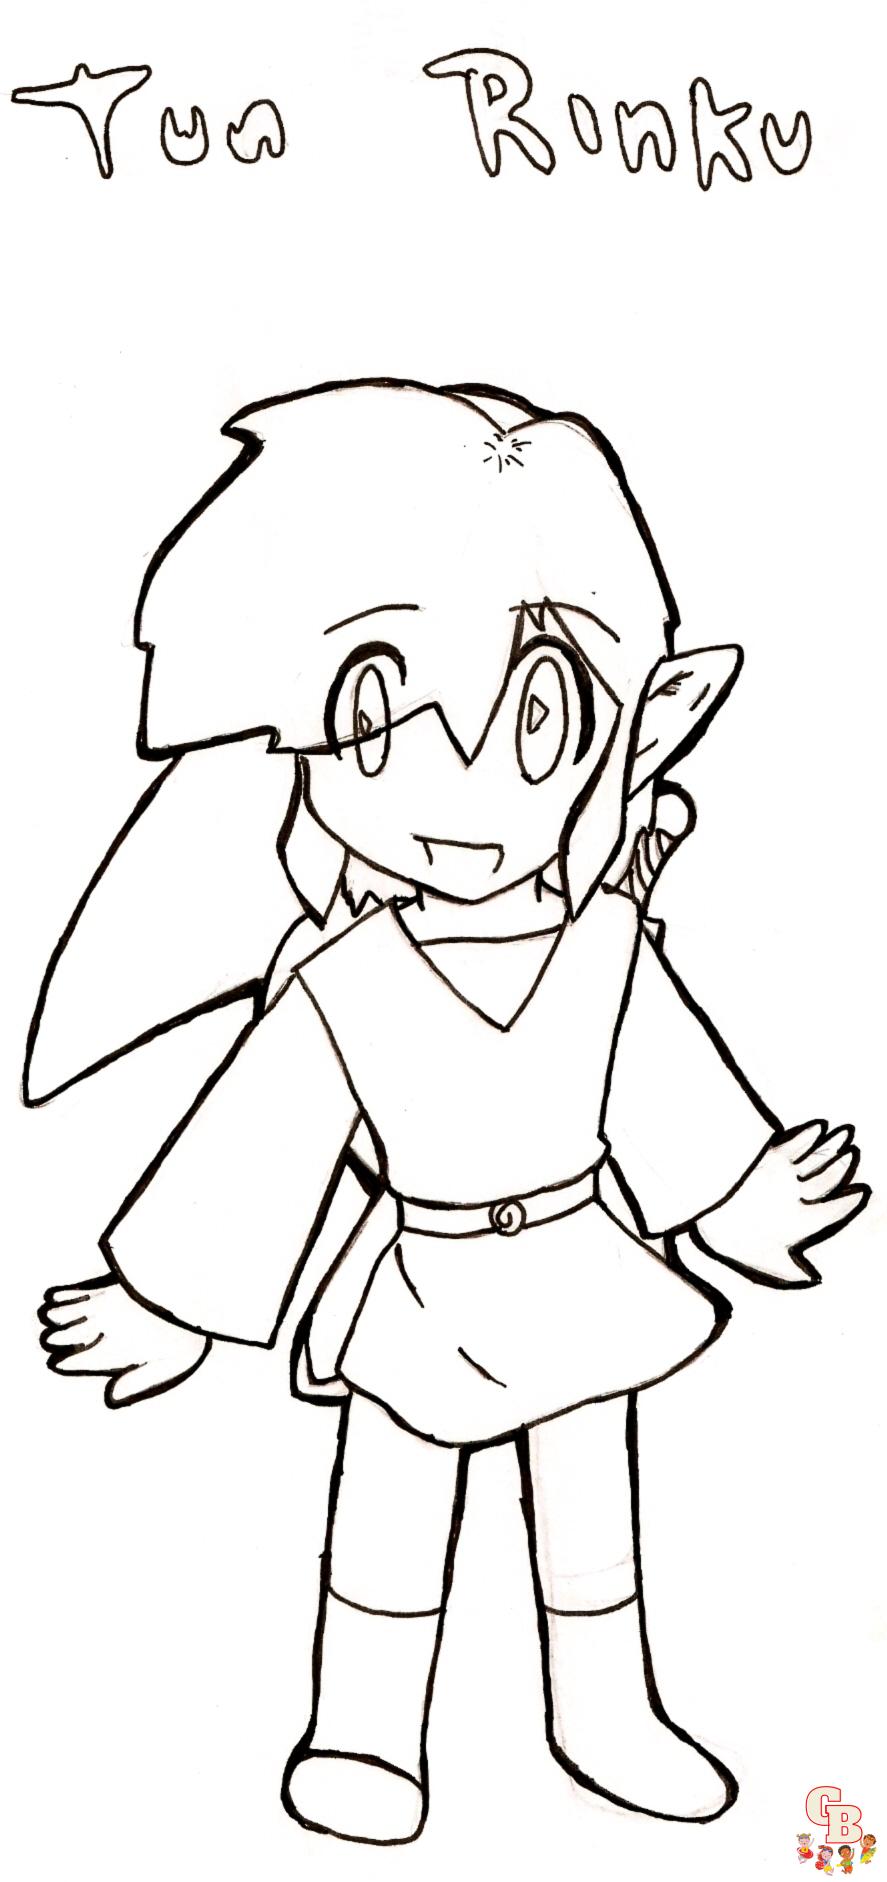 Link Coloring Pages 4